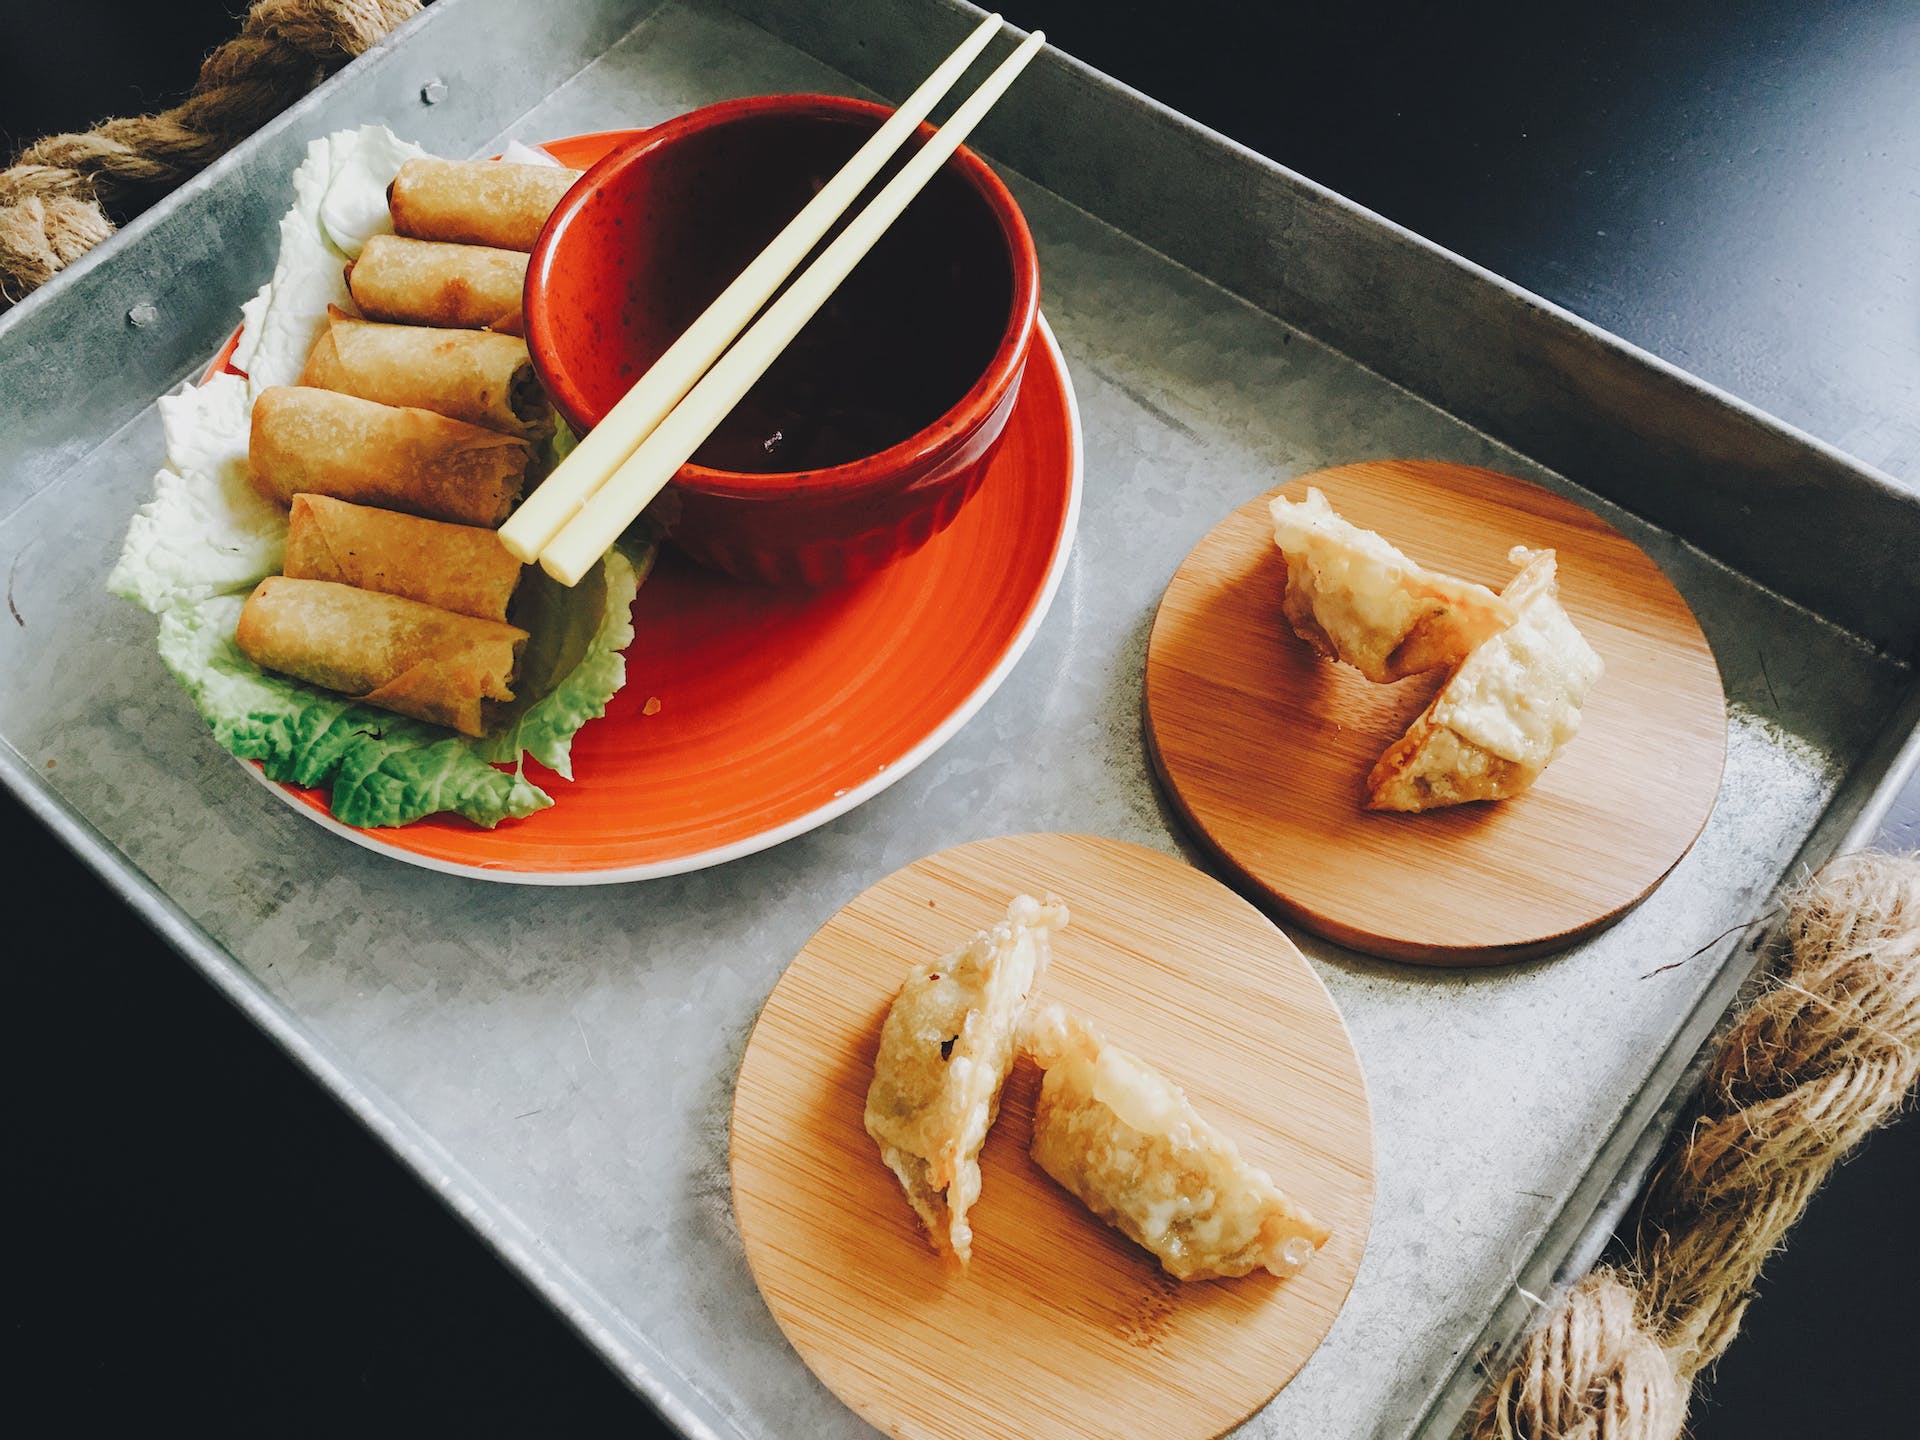 Spring rolls and dumplings on a tray | Source: Pexels